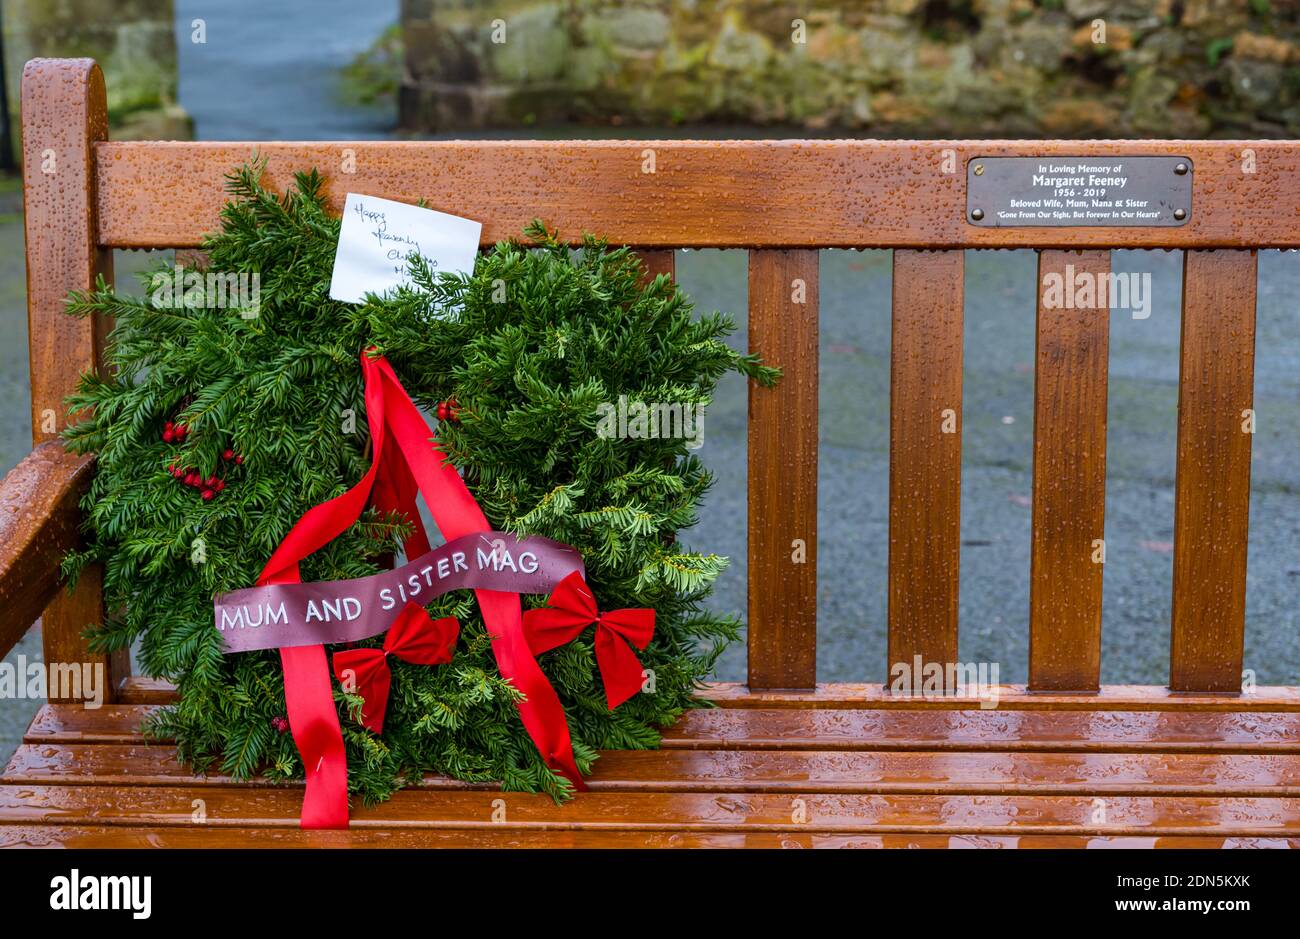 Commemorative wet wooden bench in the rain with Christmas wreath to remember a the death of a mother and sister relative, Scotland, United Kingdom Stock Photo